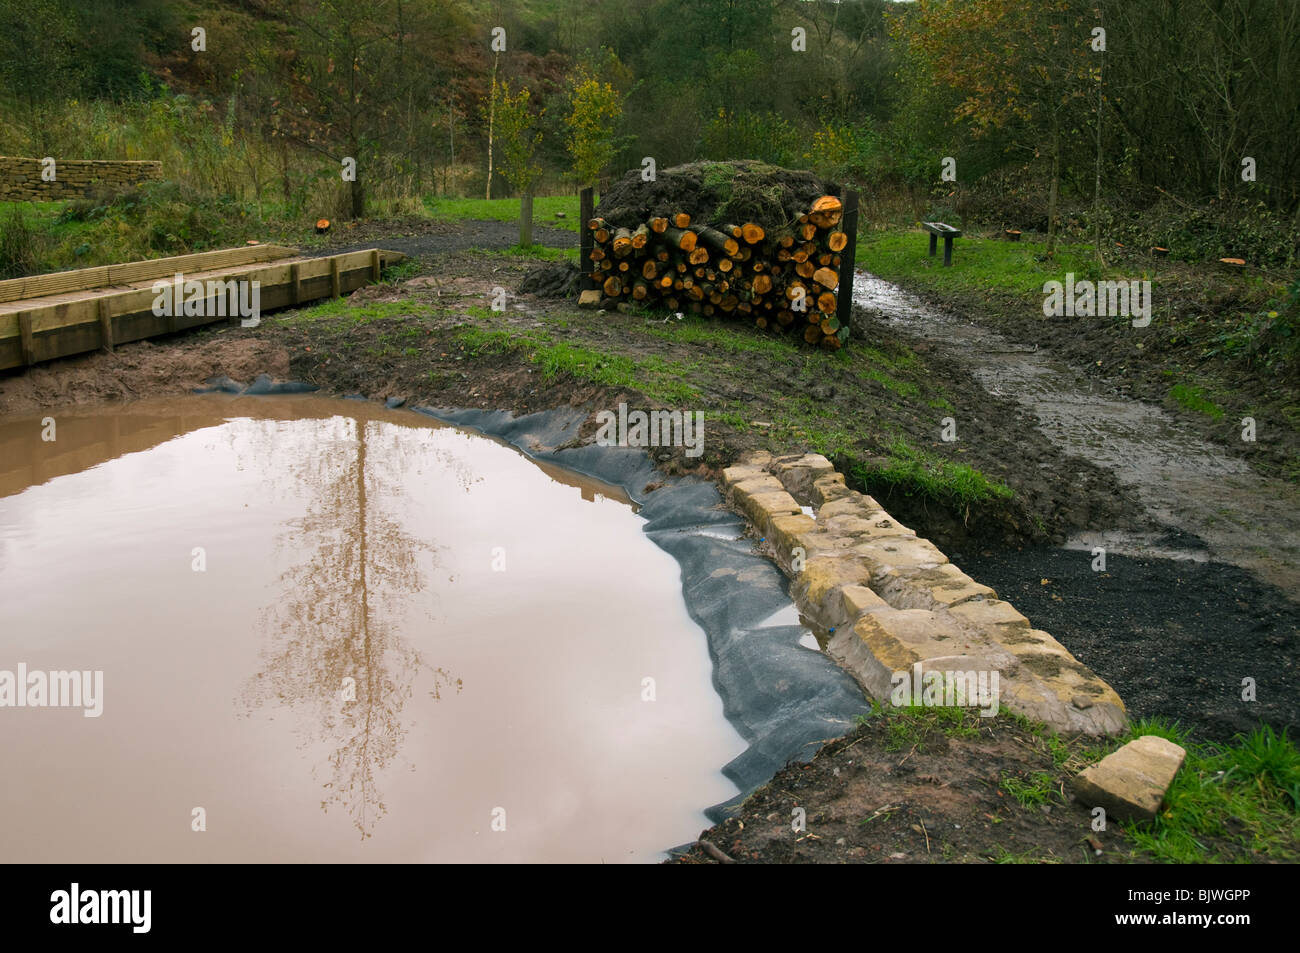 Wildlife pool under construction at Daisy Nook Country Park, Failsworth, Manchester, England, UK Stock Photo